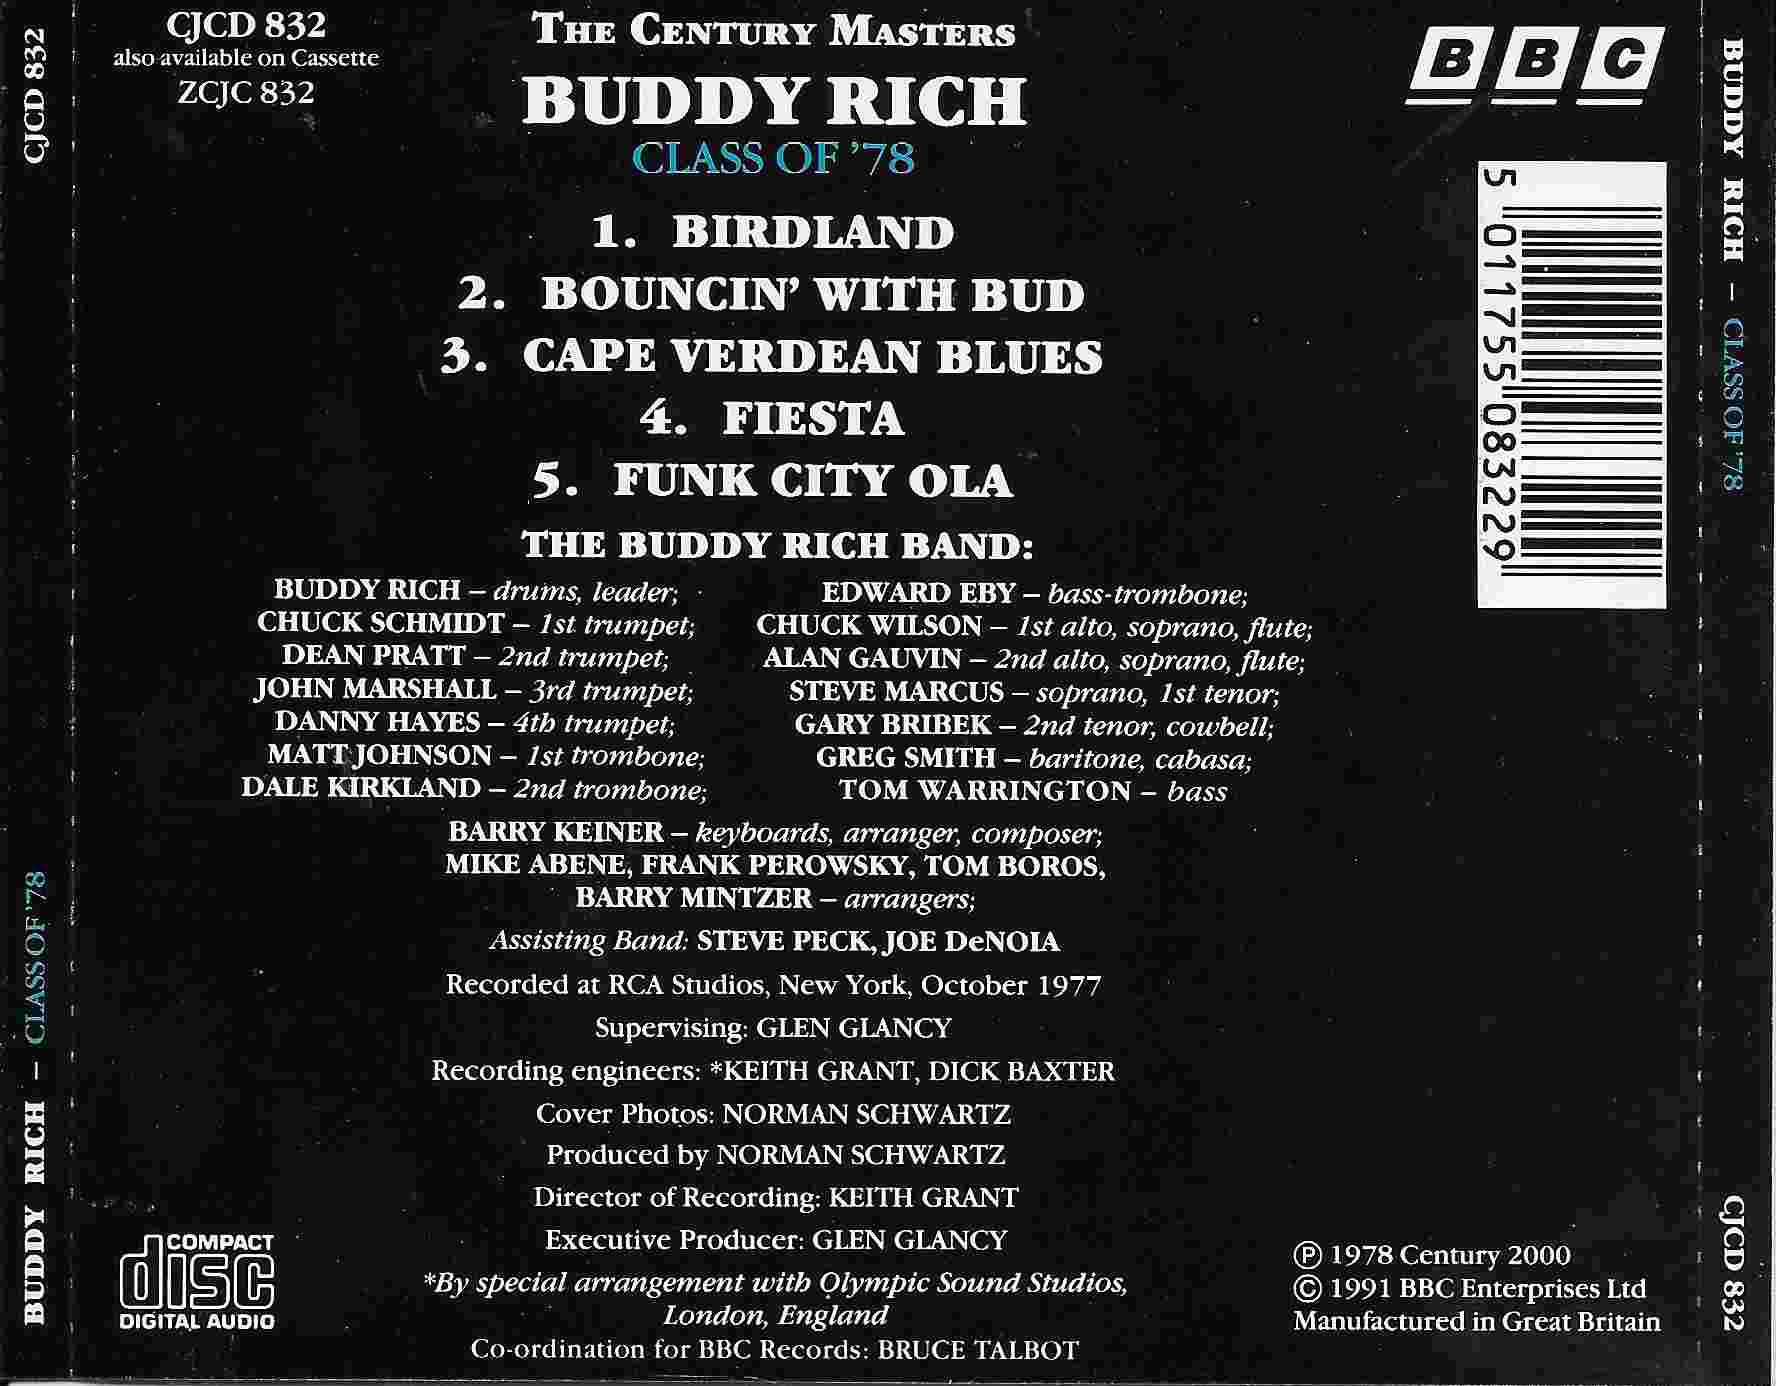 Picture of CJCD 832 The Century Catalogue - Buddy Rich class of 78 by artist The Buddy Rich Big Band from the BBC records and Tapes library